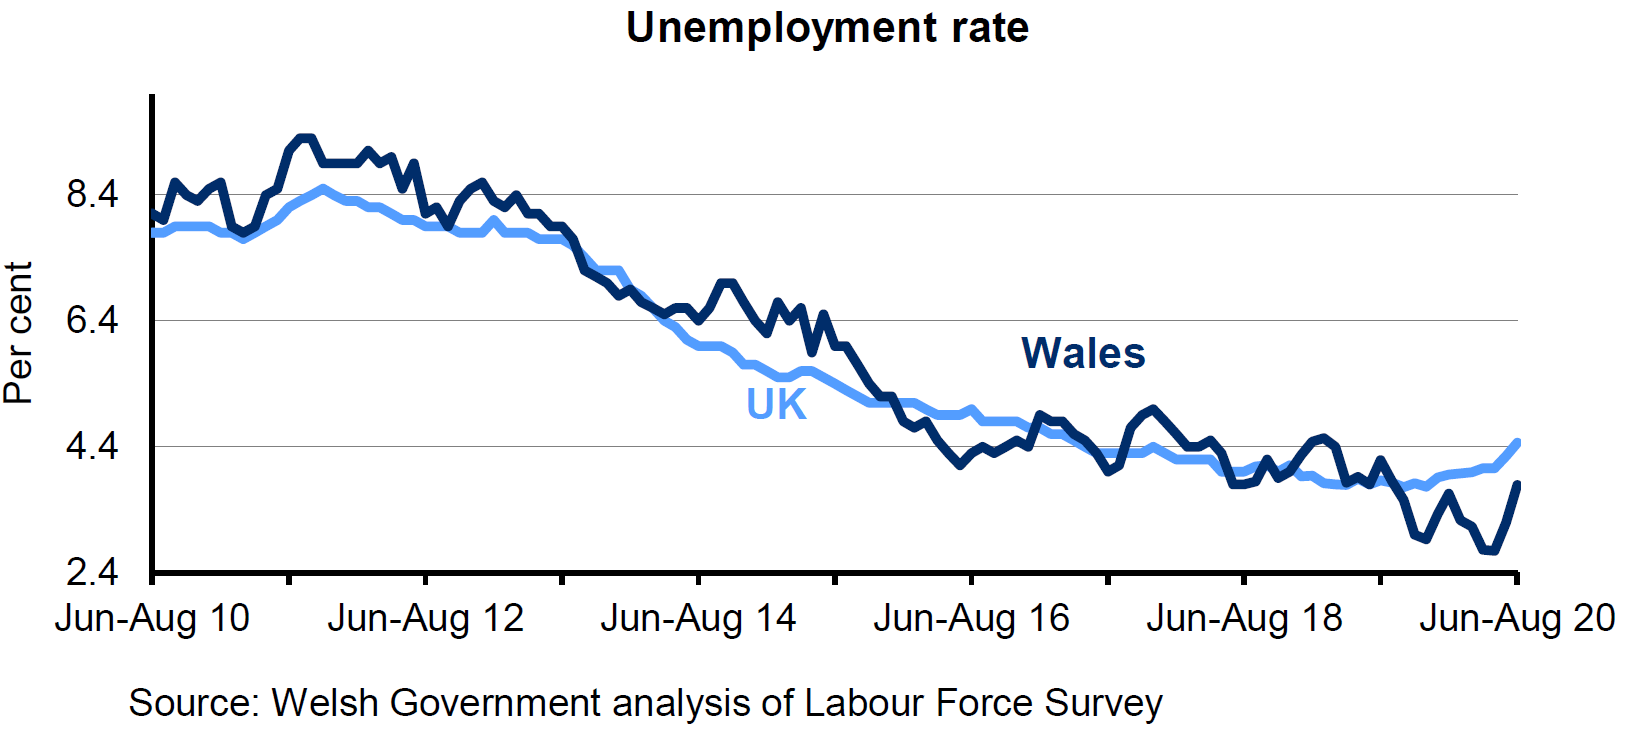 Chart showing the percentage of economically active people aged 16+ who are unemployed for Wales and the UK. The unemployment rate has decreased overall in both Wales and the UK over the last 4 years, but has increased over the last couple of months